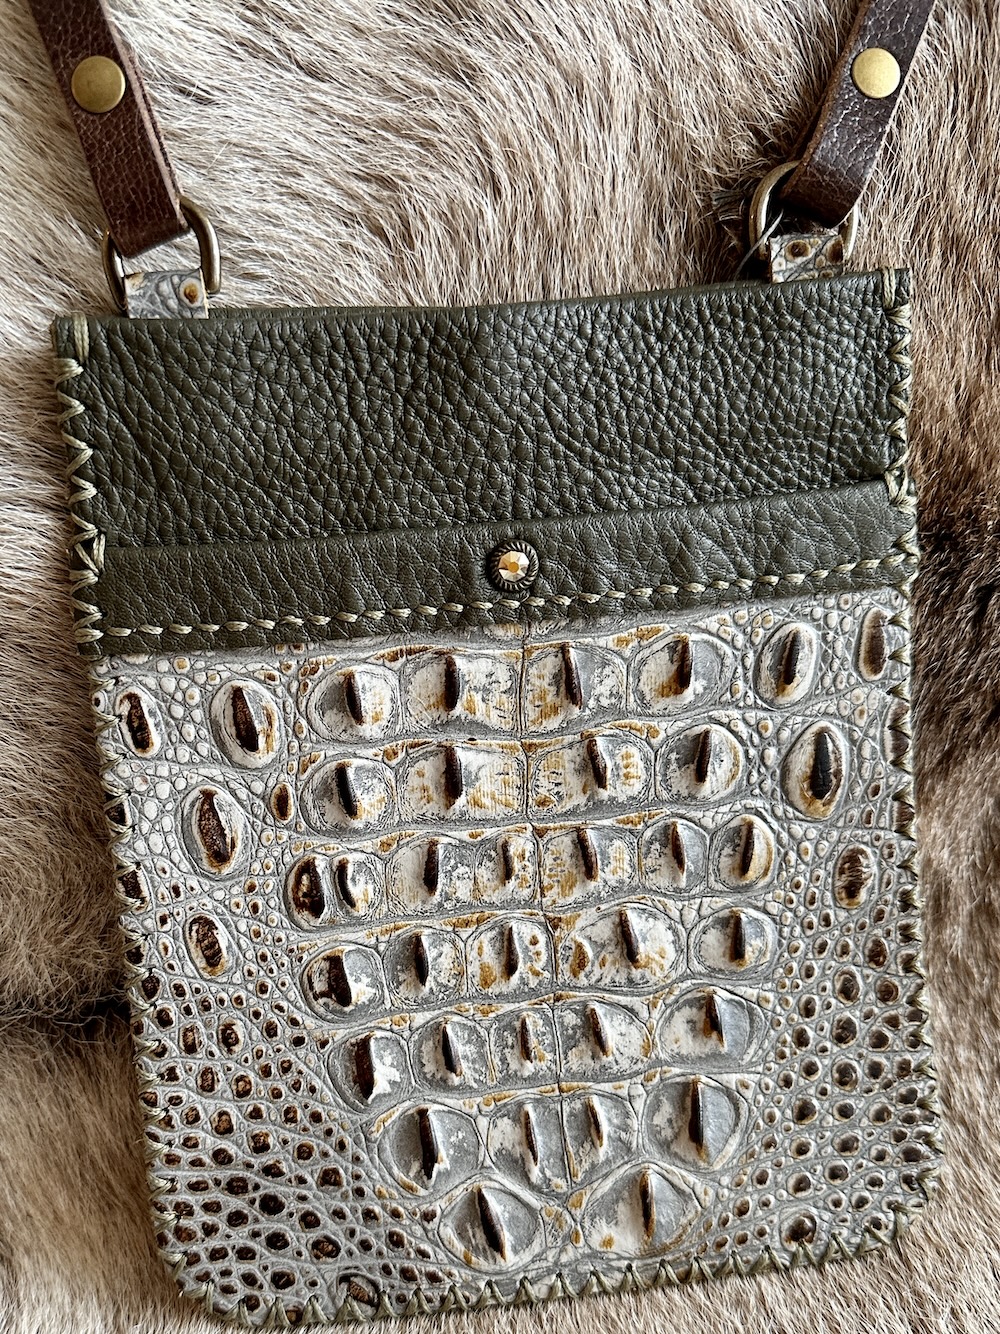 Olive leather bag with embossed crocodile pocket with brown, creams and grays.